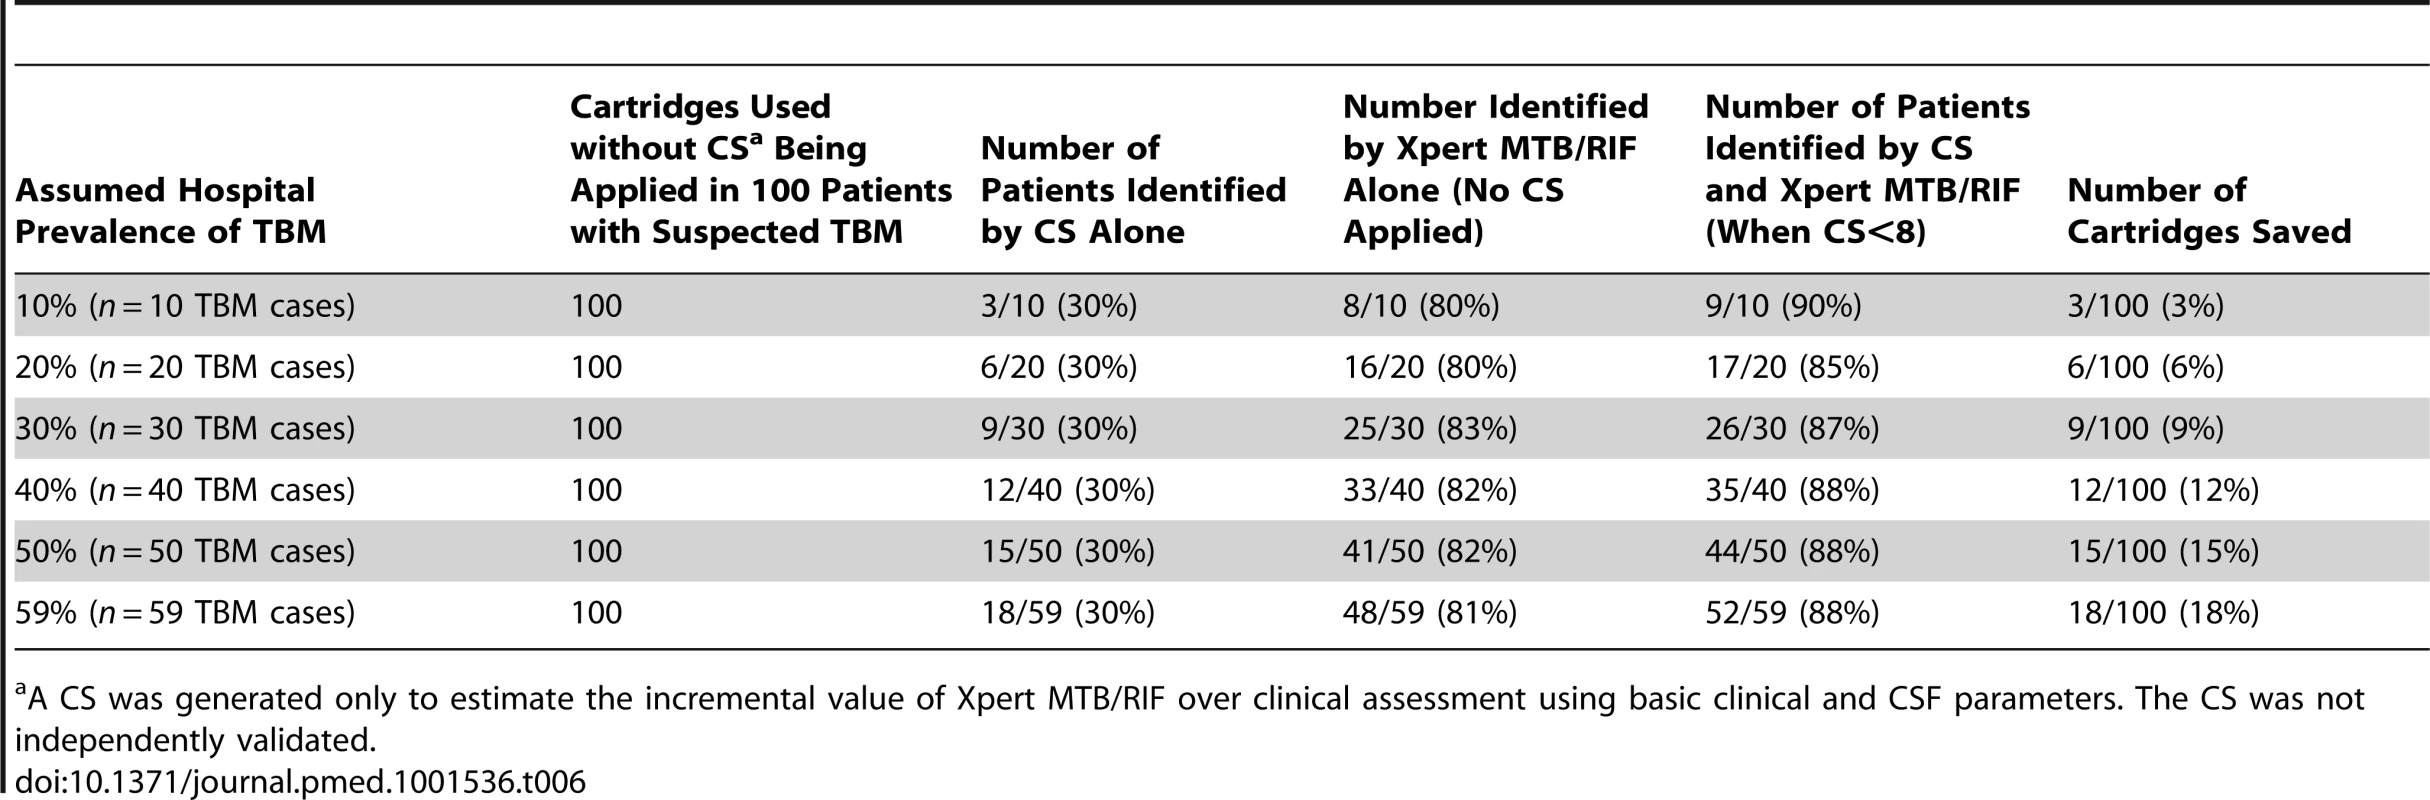 The number of cartridges potentially saved when using CS prior to centrifuged Xpert MTB/RIF testing in a hypothetical cohort of 100 patients with suspected TBM.